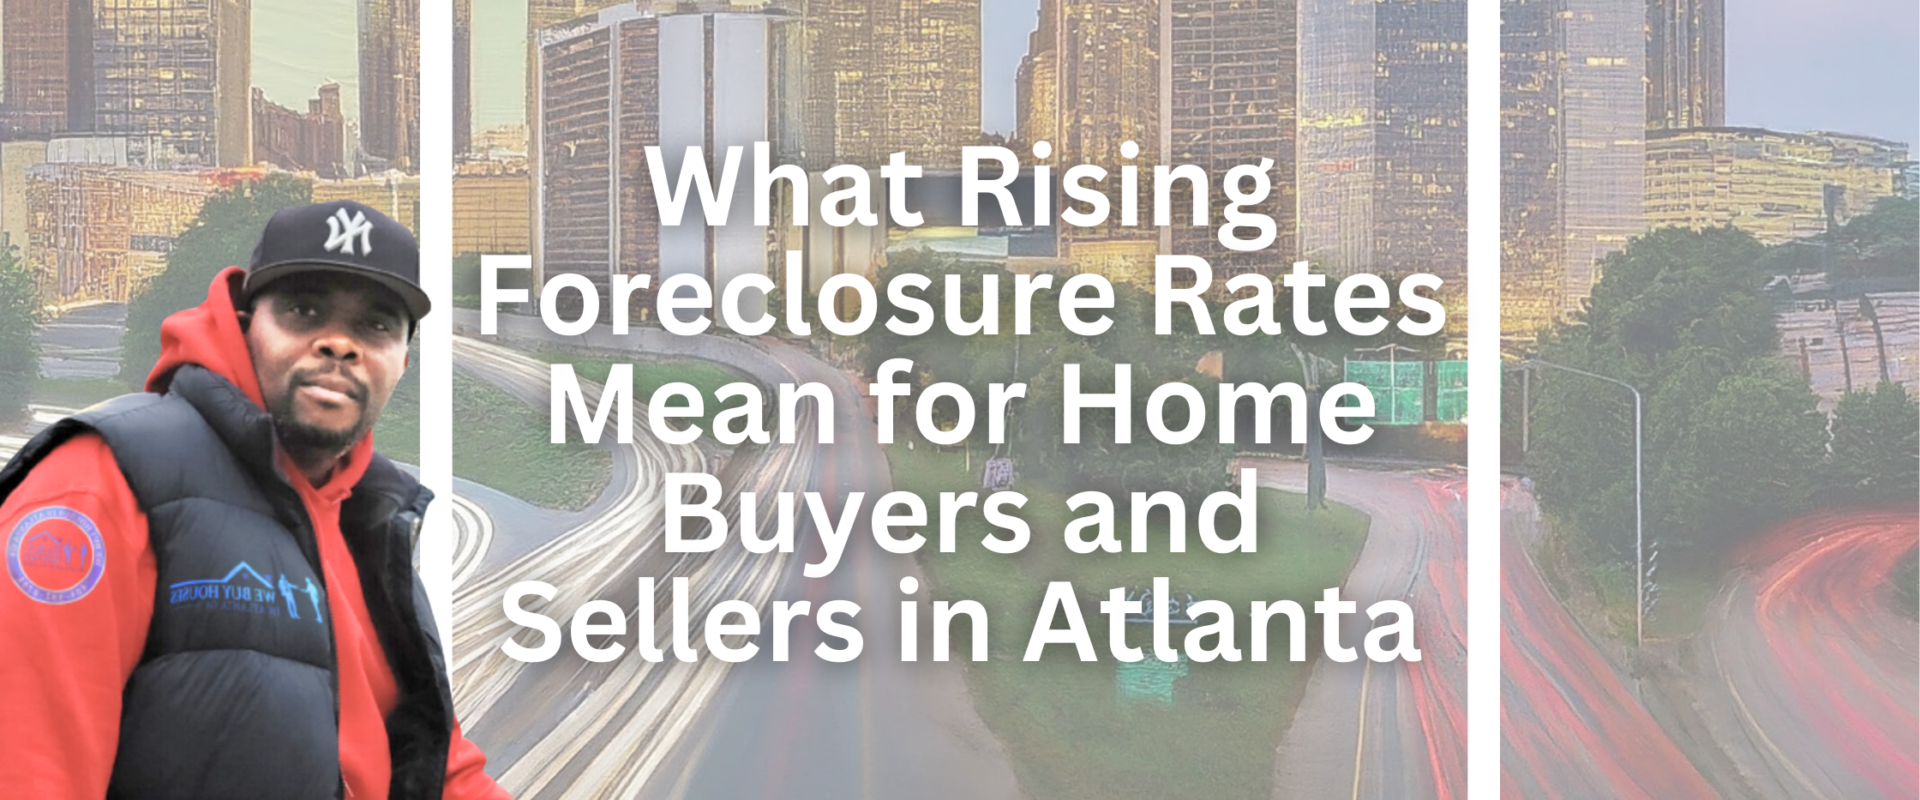 What Rising Foreclosure Rates Mean for Home Buyers and Sellers in Atlanta